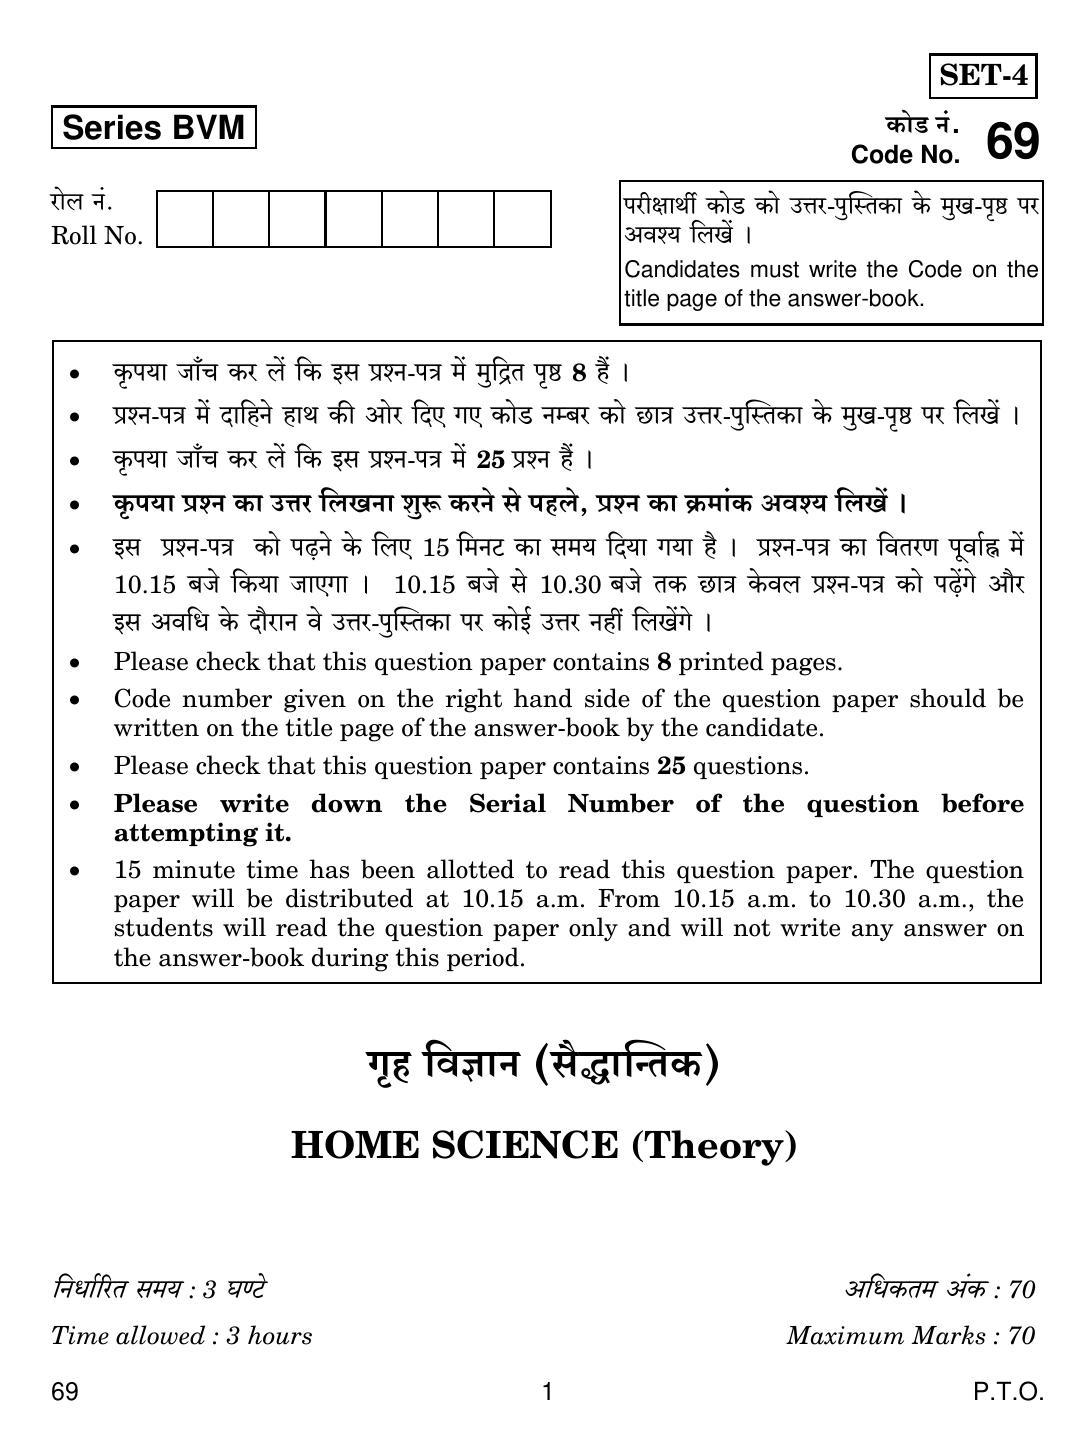 CBSE Class 12 69 Home Science 2019 Question Paper - Page 1